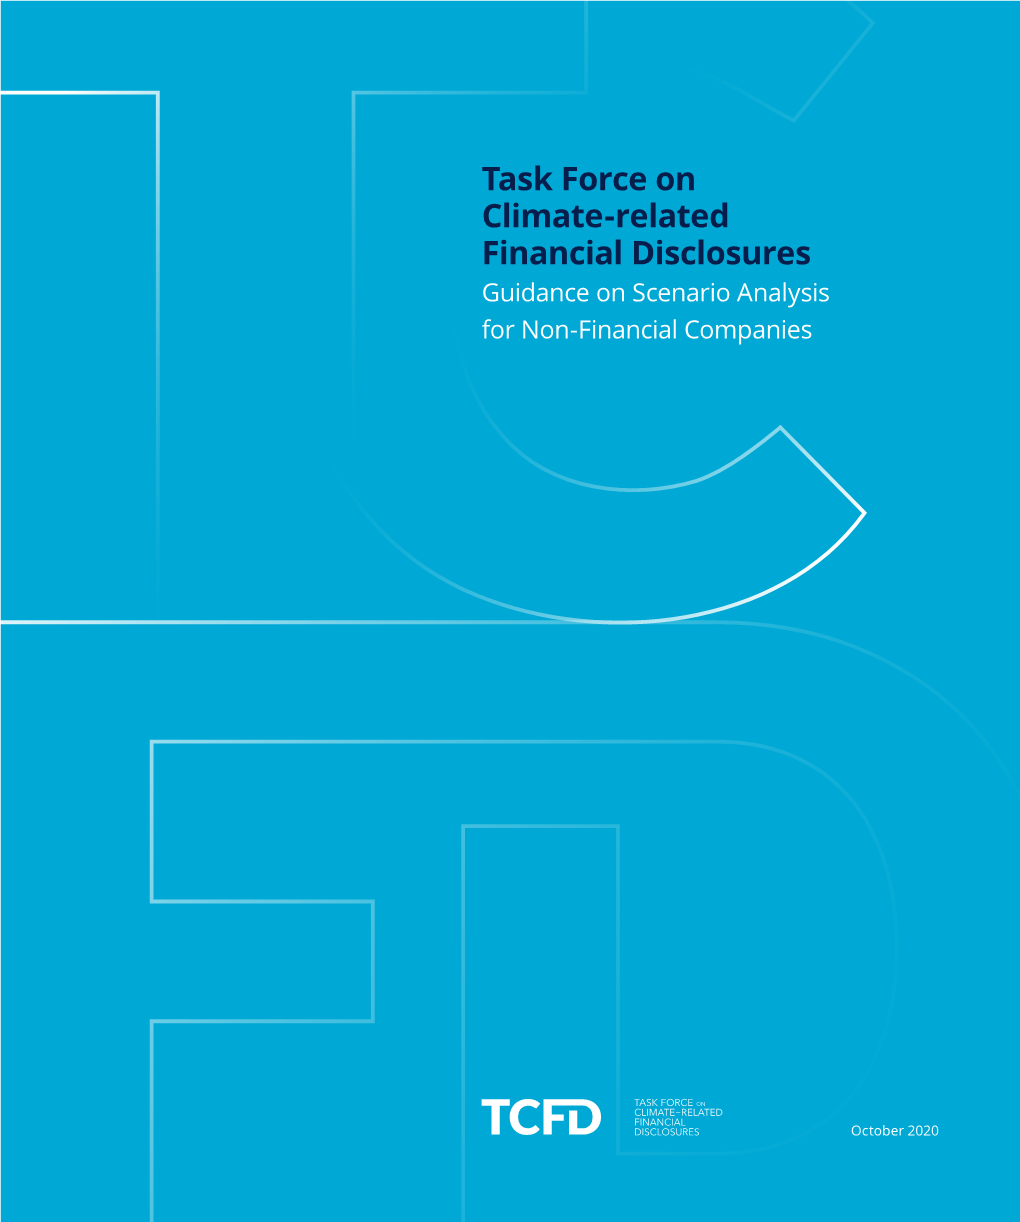 Task Force on Climate-Related Financial Disclosures Guidance on Scenario Analysis for Non-Financial Companies